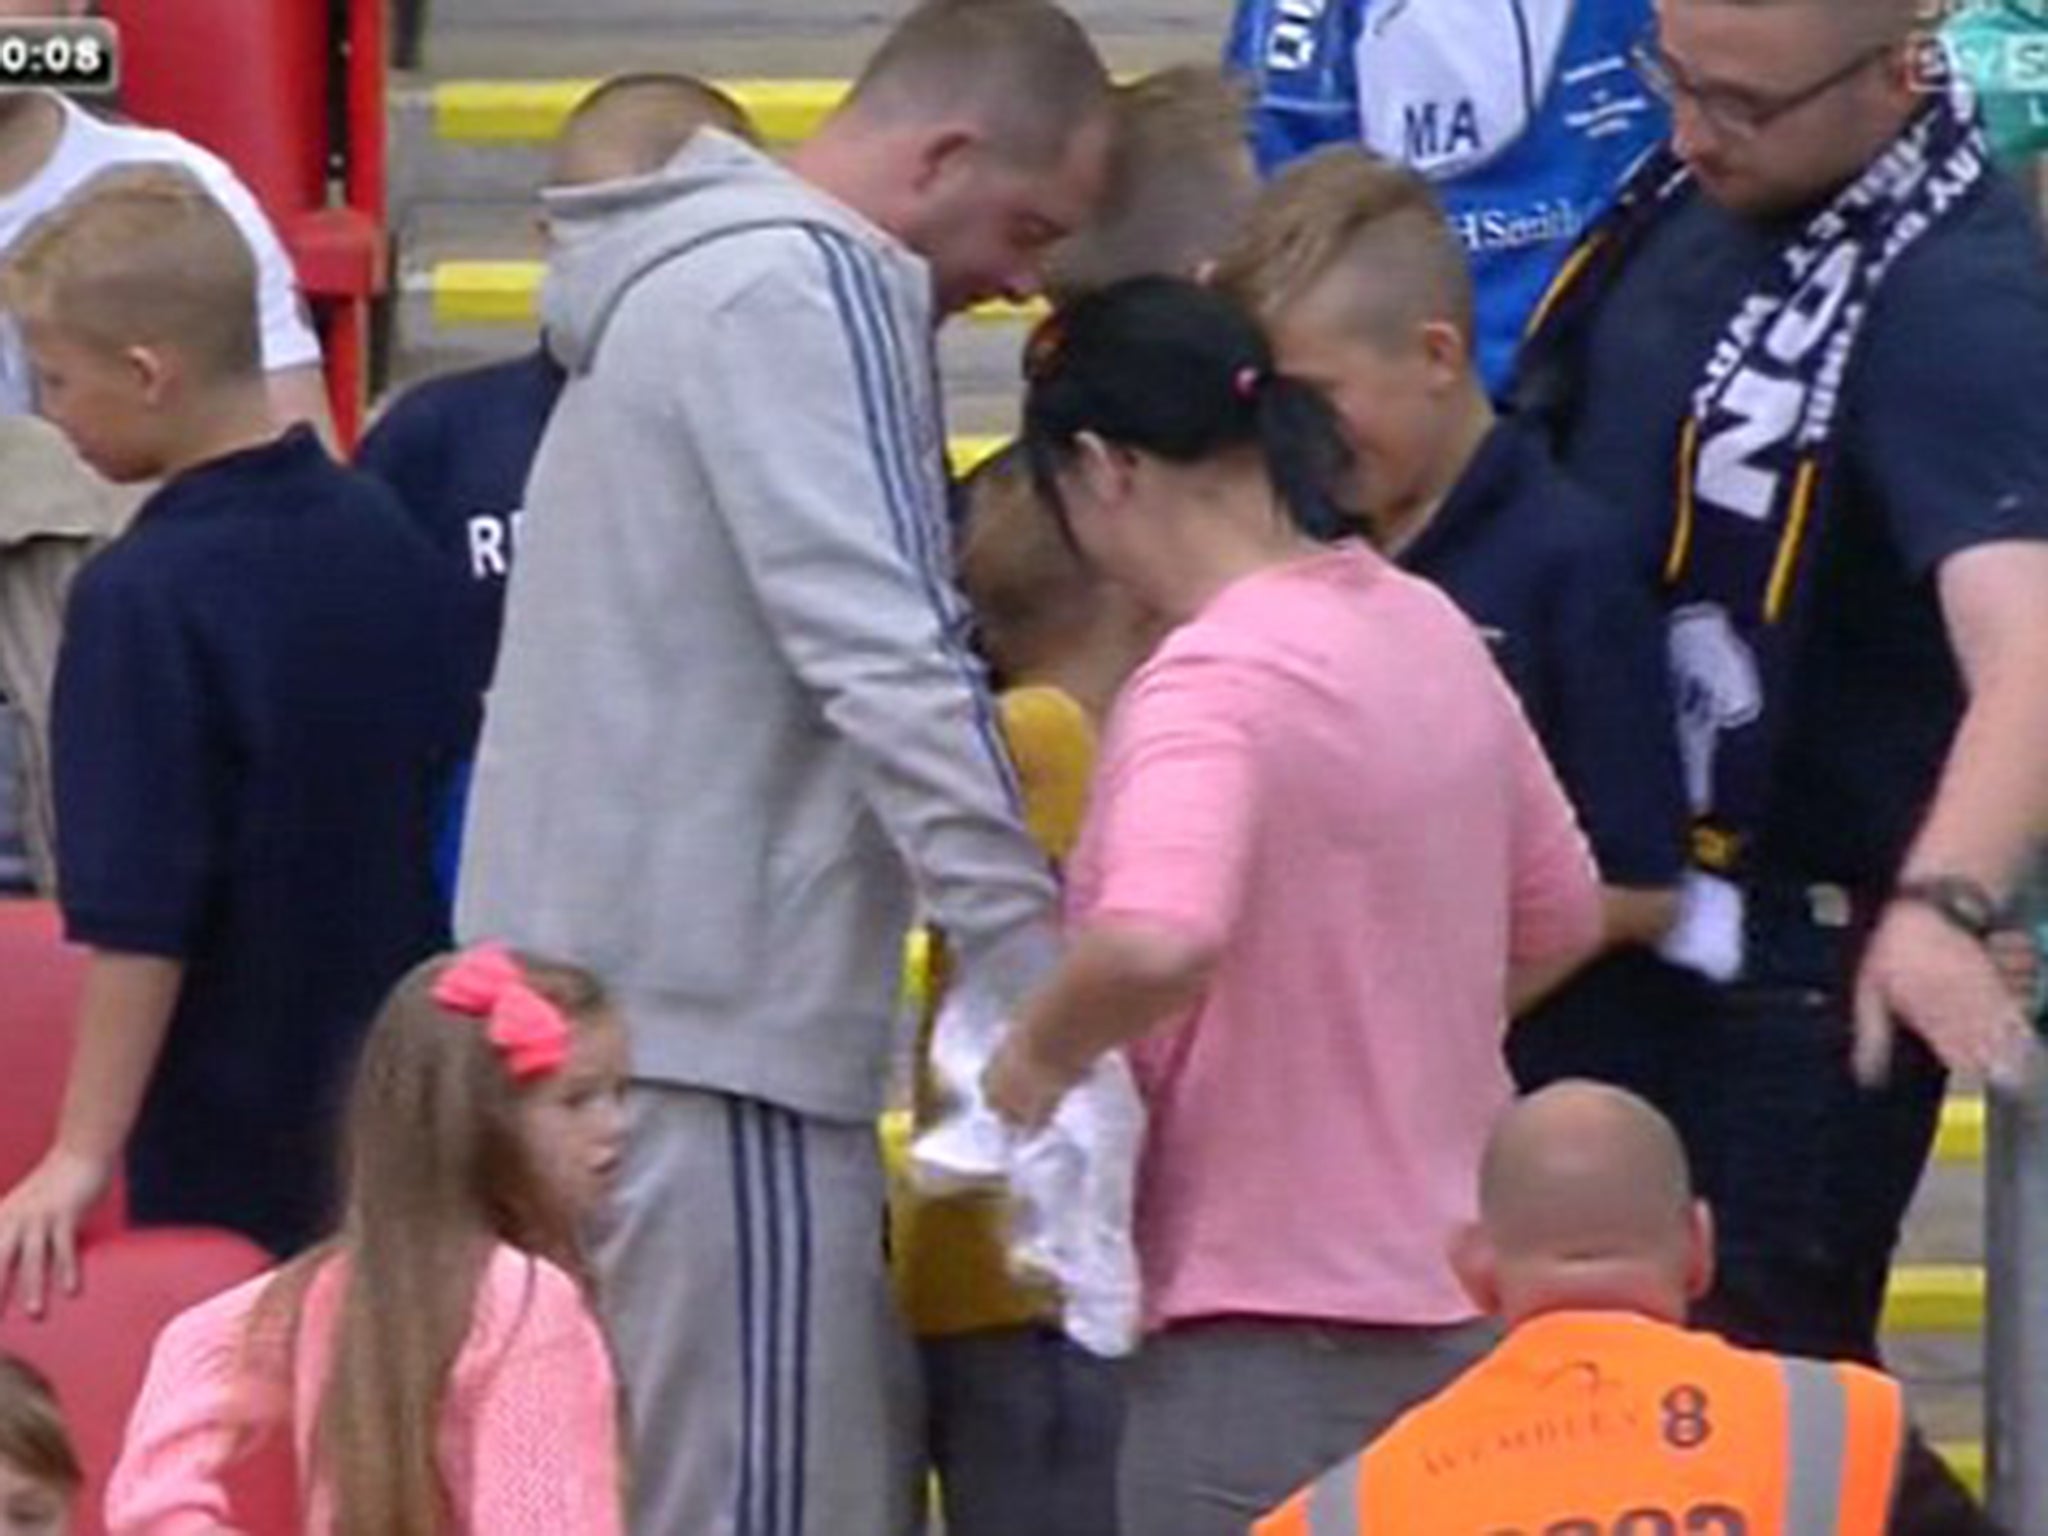 A woman appears to snatch Jermaine Beckford's shirt away from an eight-year-old Preston fan